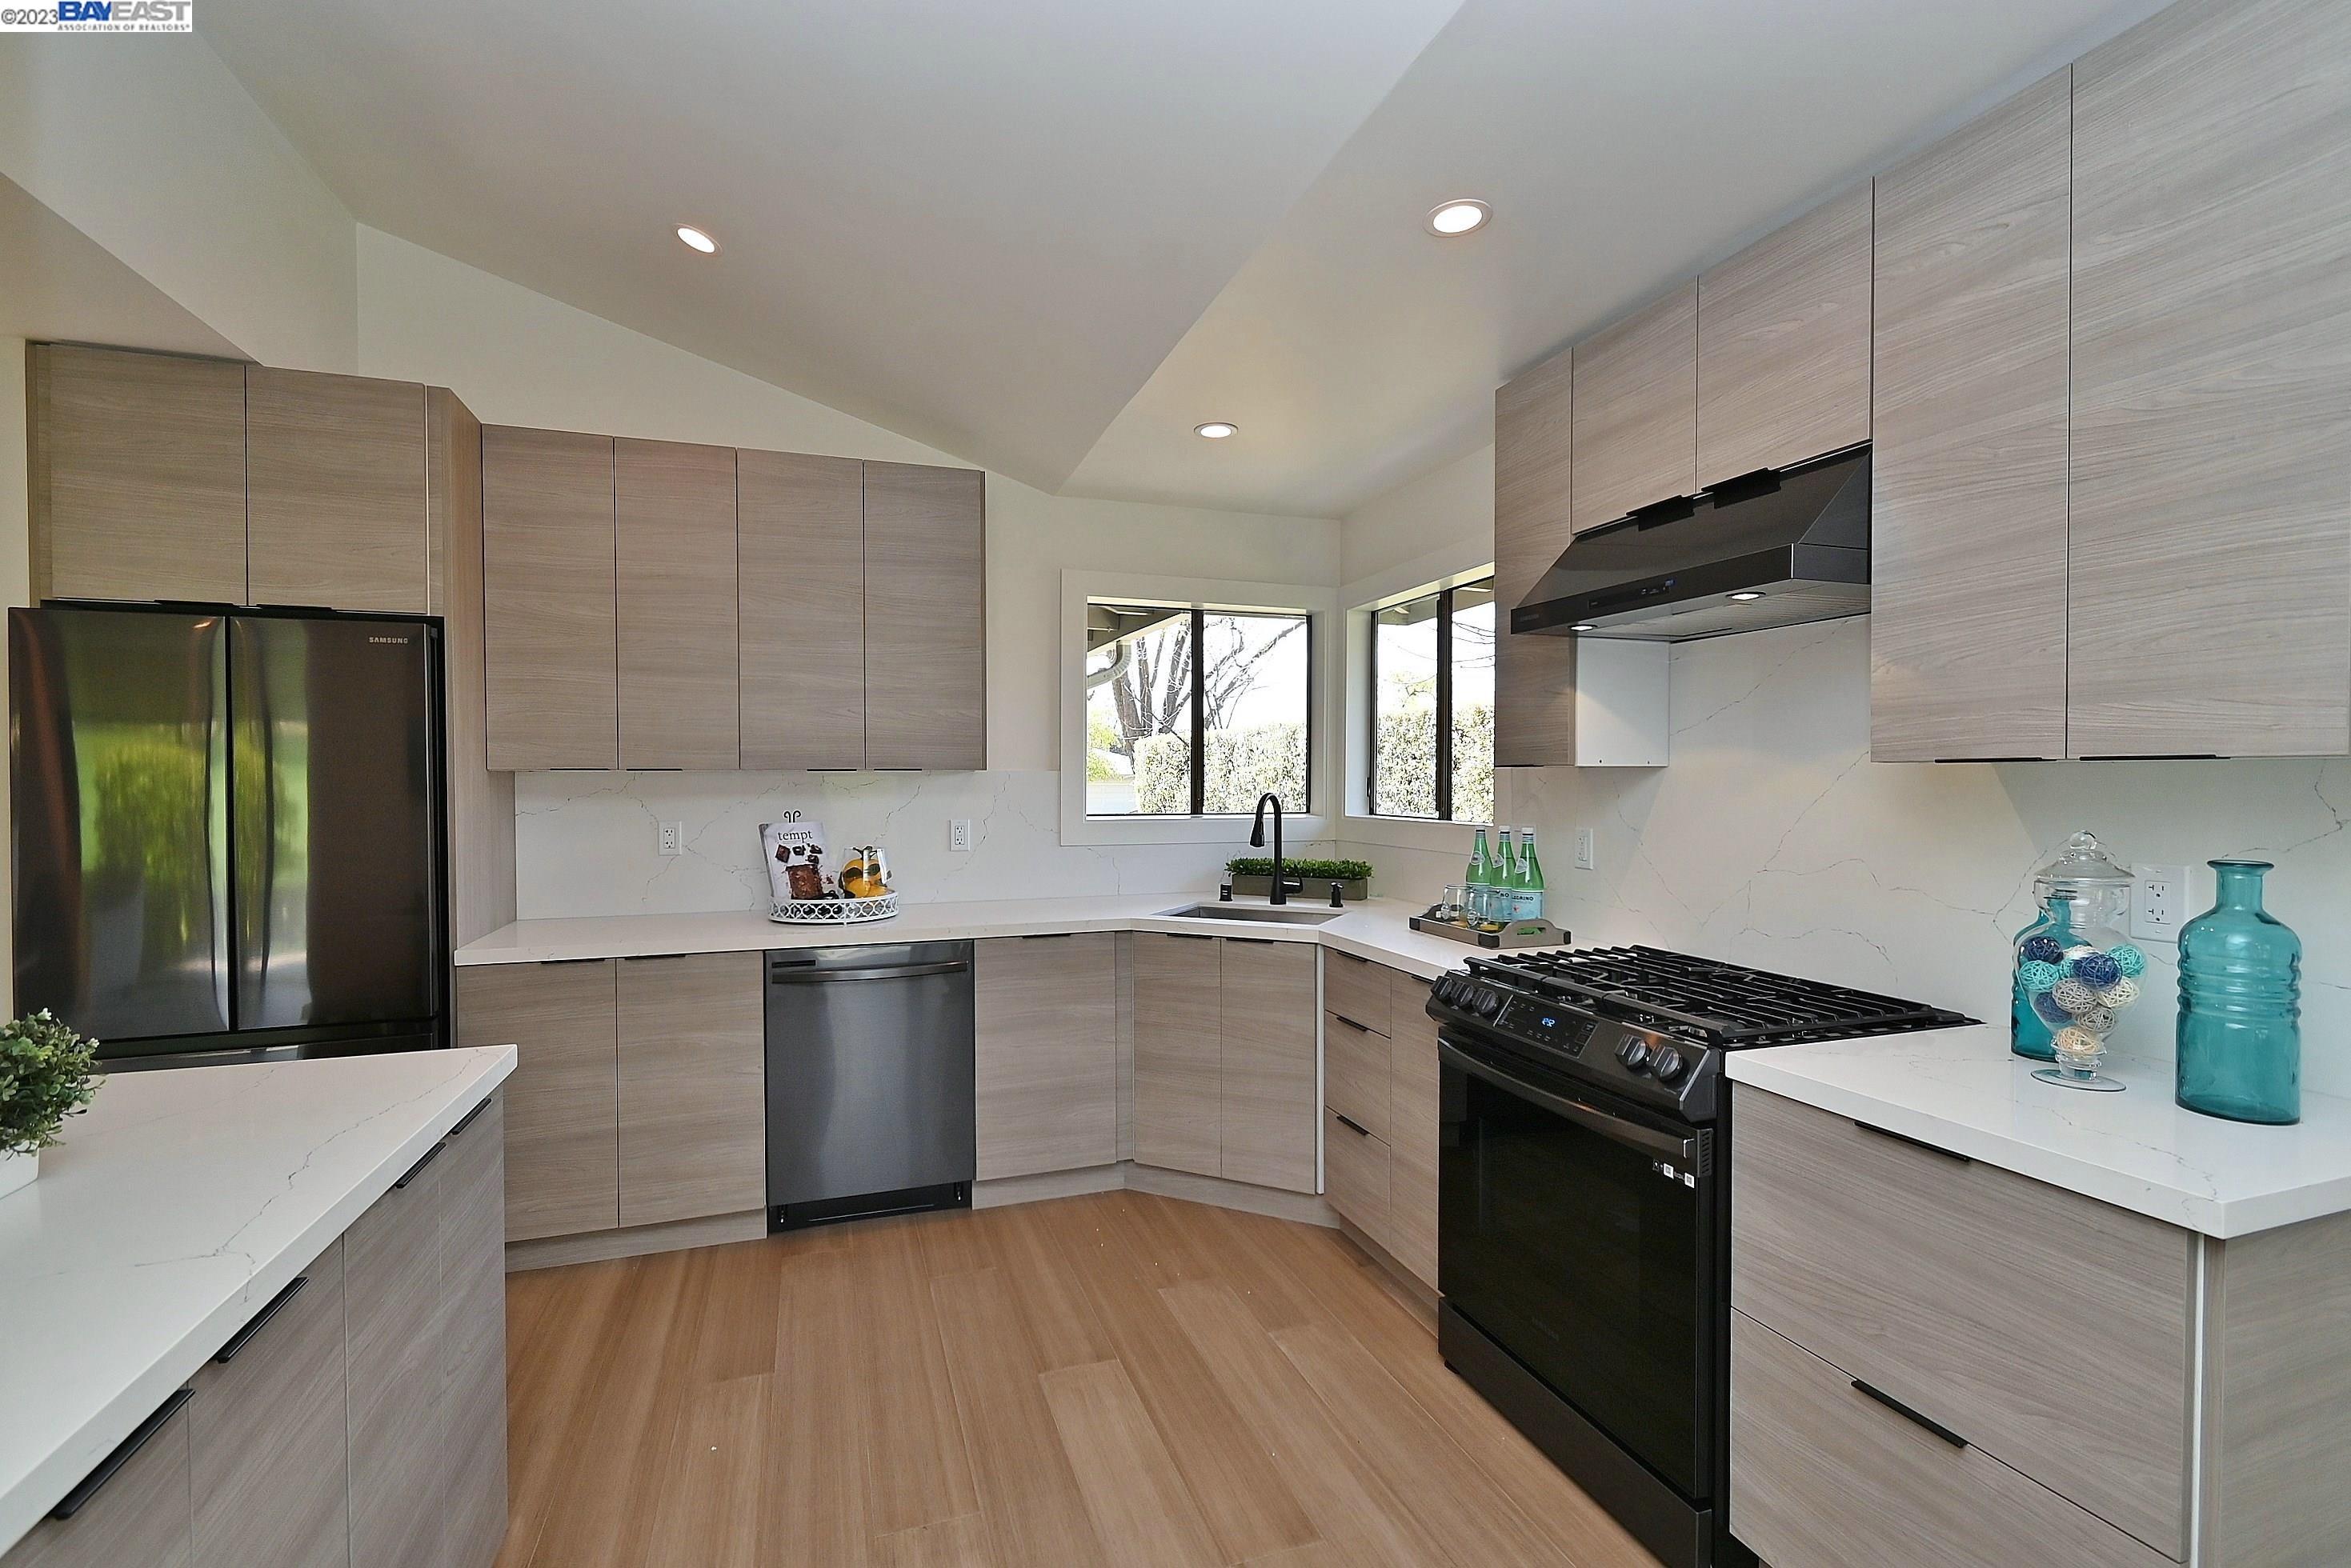 a kitchen with stainless steel appliances a sink dishwasher stove refrigerator and cabinets